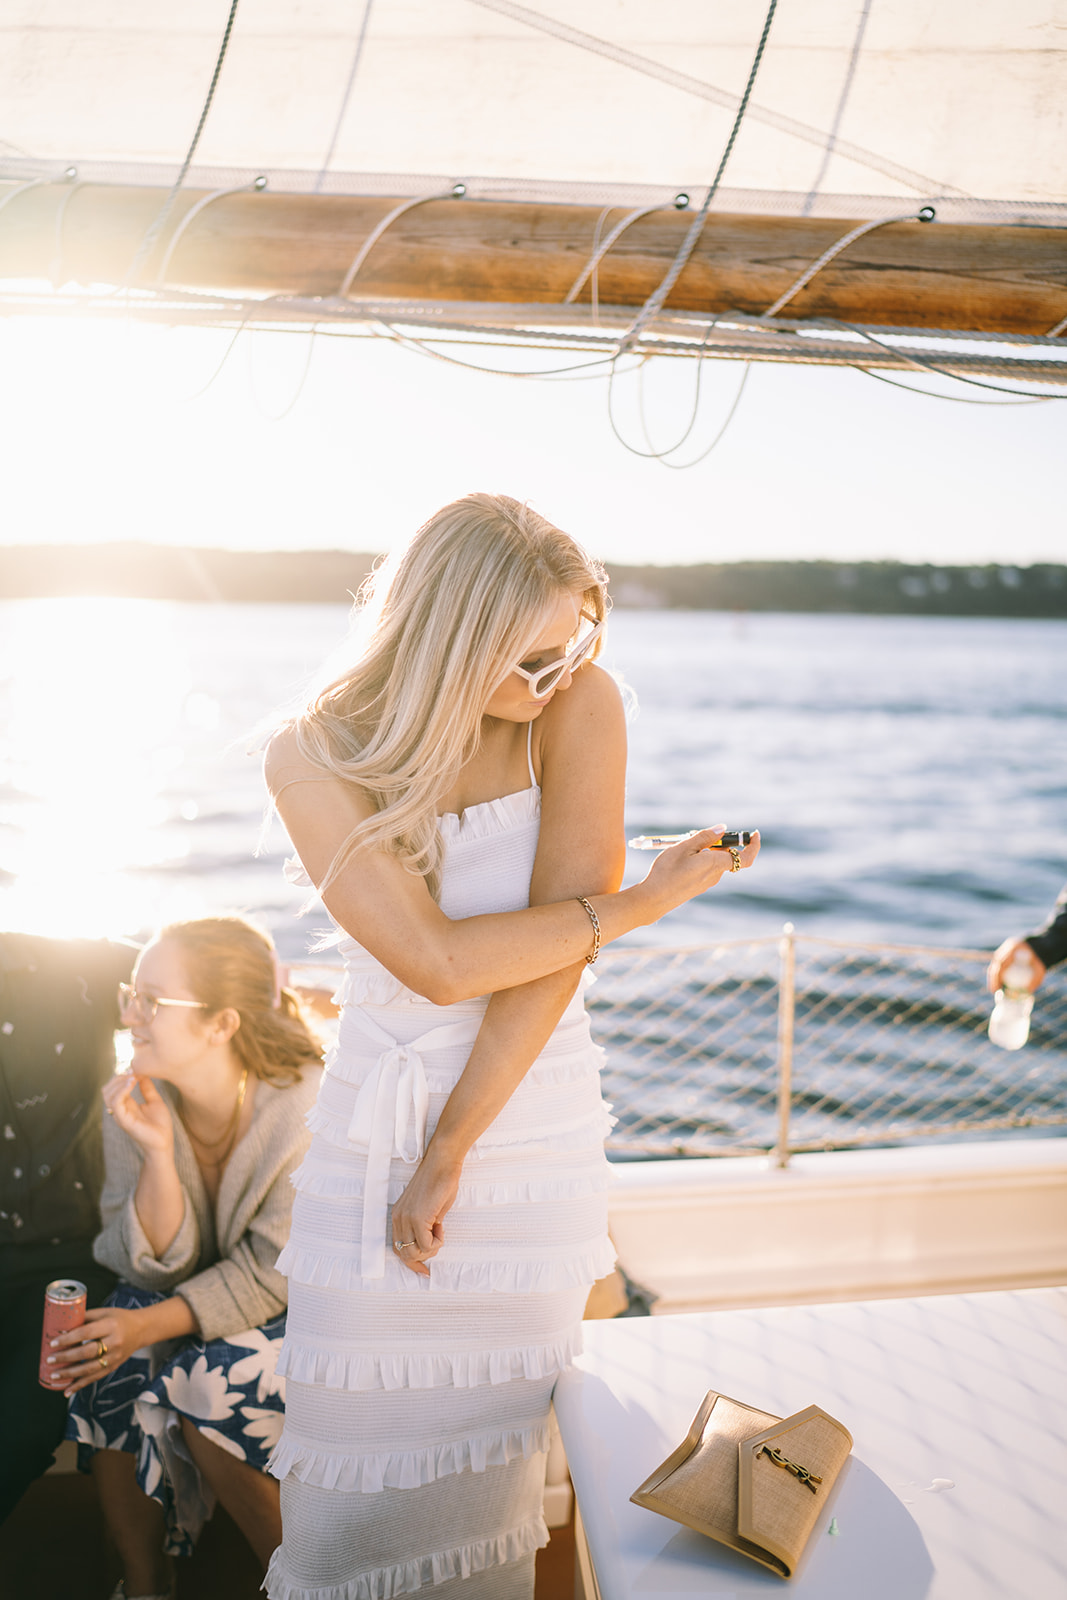 Woman in white dress on sailboat looks down at arm while giving herself insulin shot